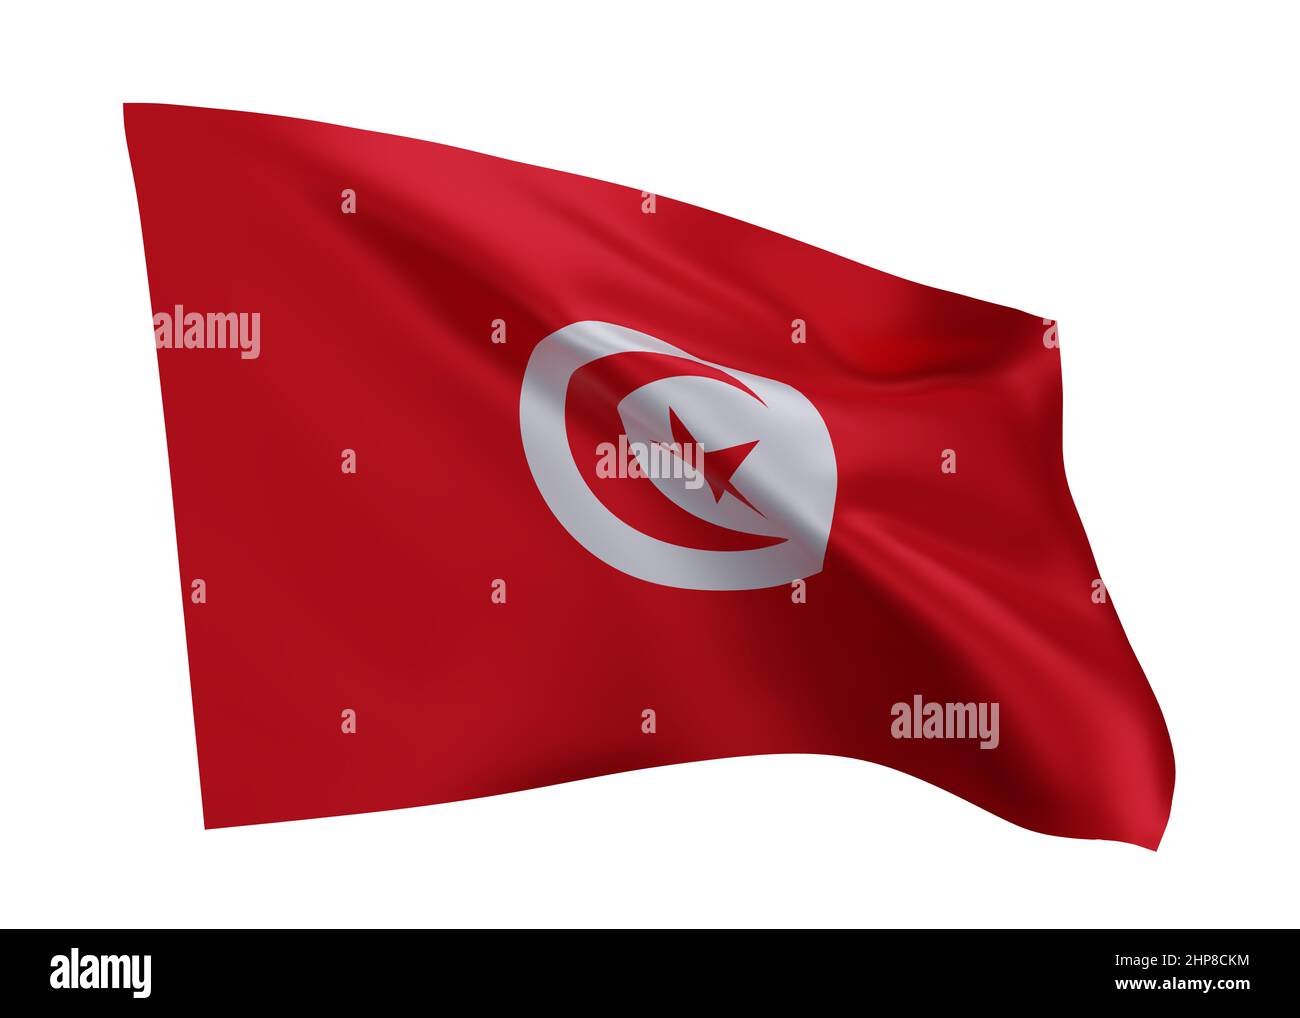 3d illustration flag of Tunisia. Tunisian high resolution flag isolated against white background. 3d rendering Stock Photo